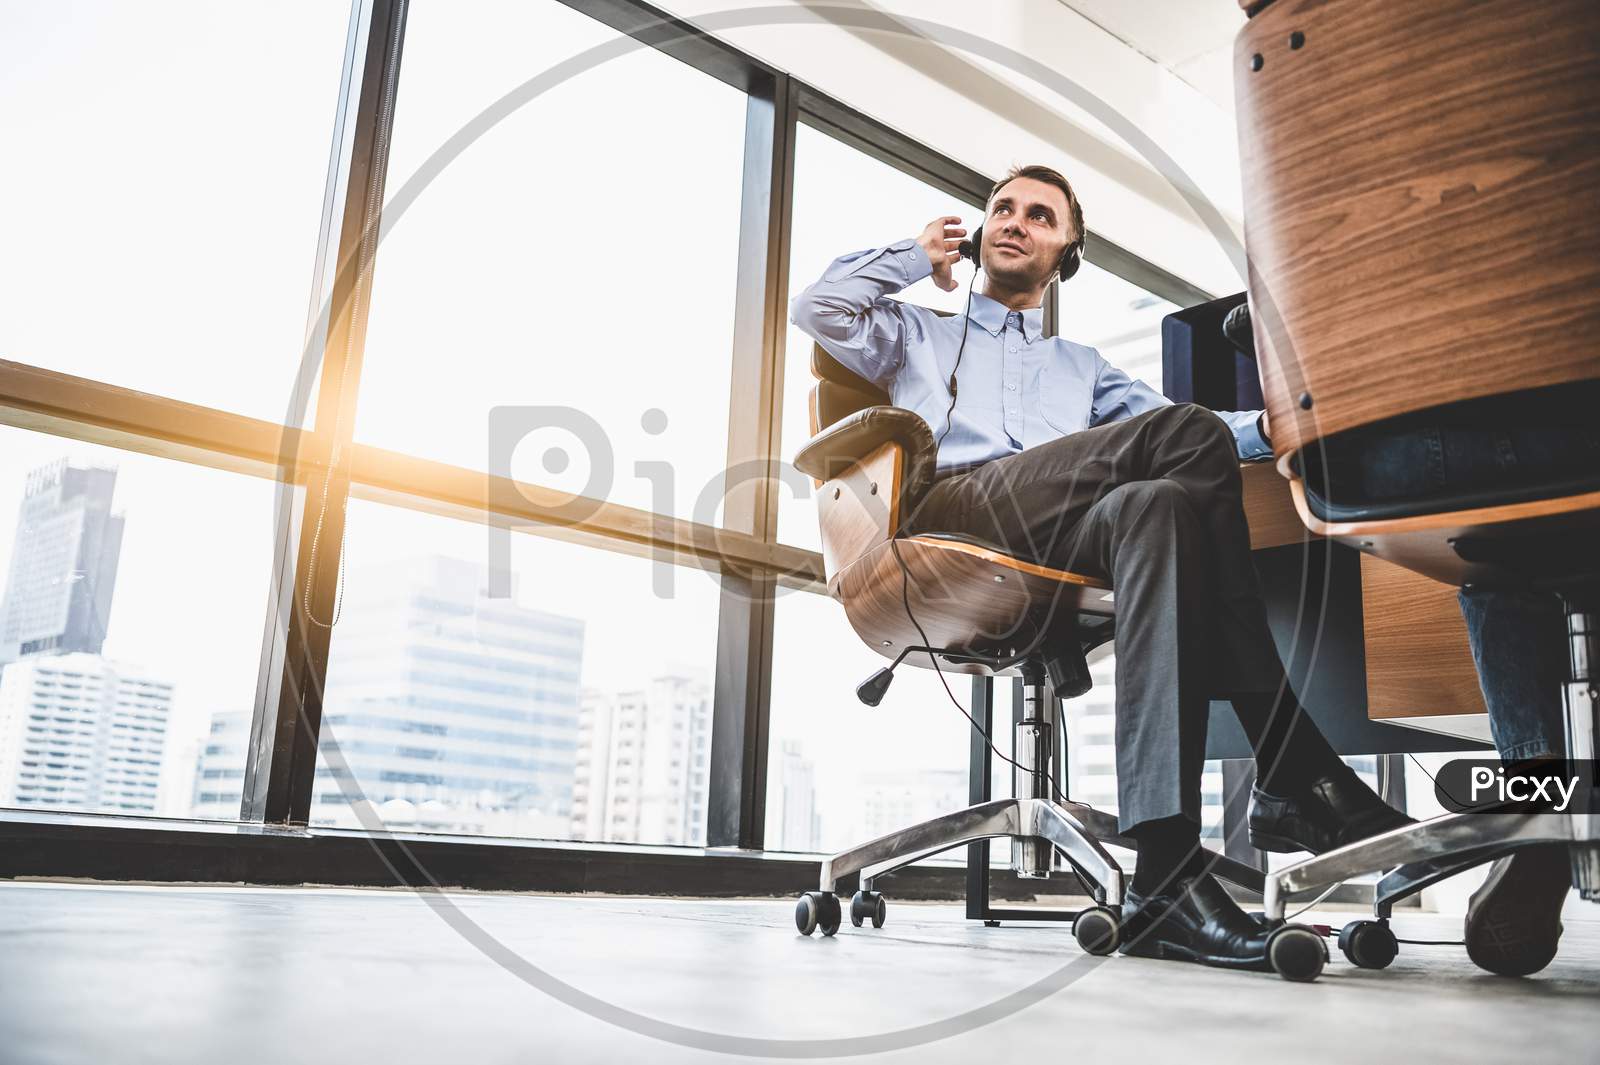 Portrait Of Happy Handsome Business Man With Headset In Modern Office With City Urban Building Background. Businessman Sitting On Chair. Caucasian Man Relaxing In Customer Care Service Call Center